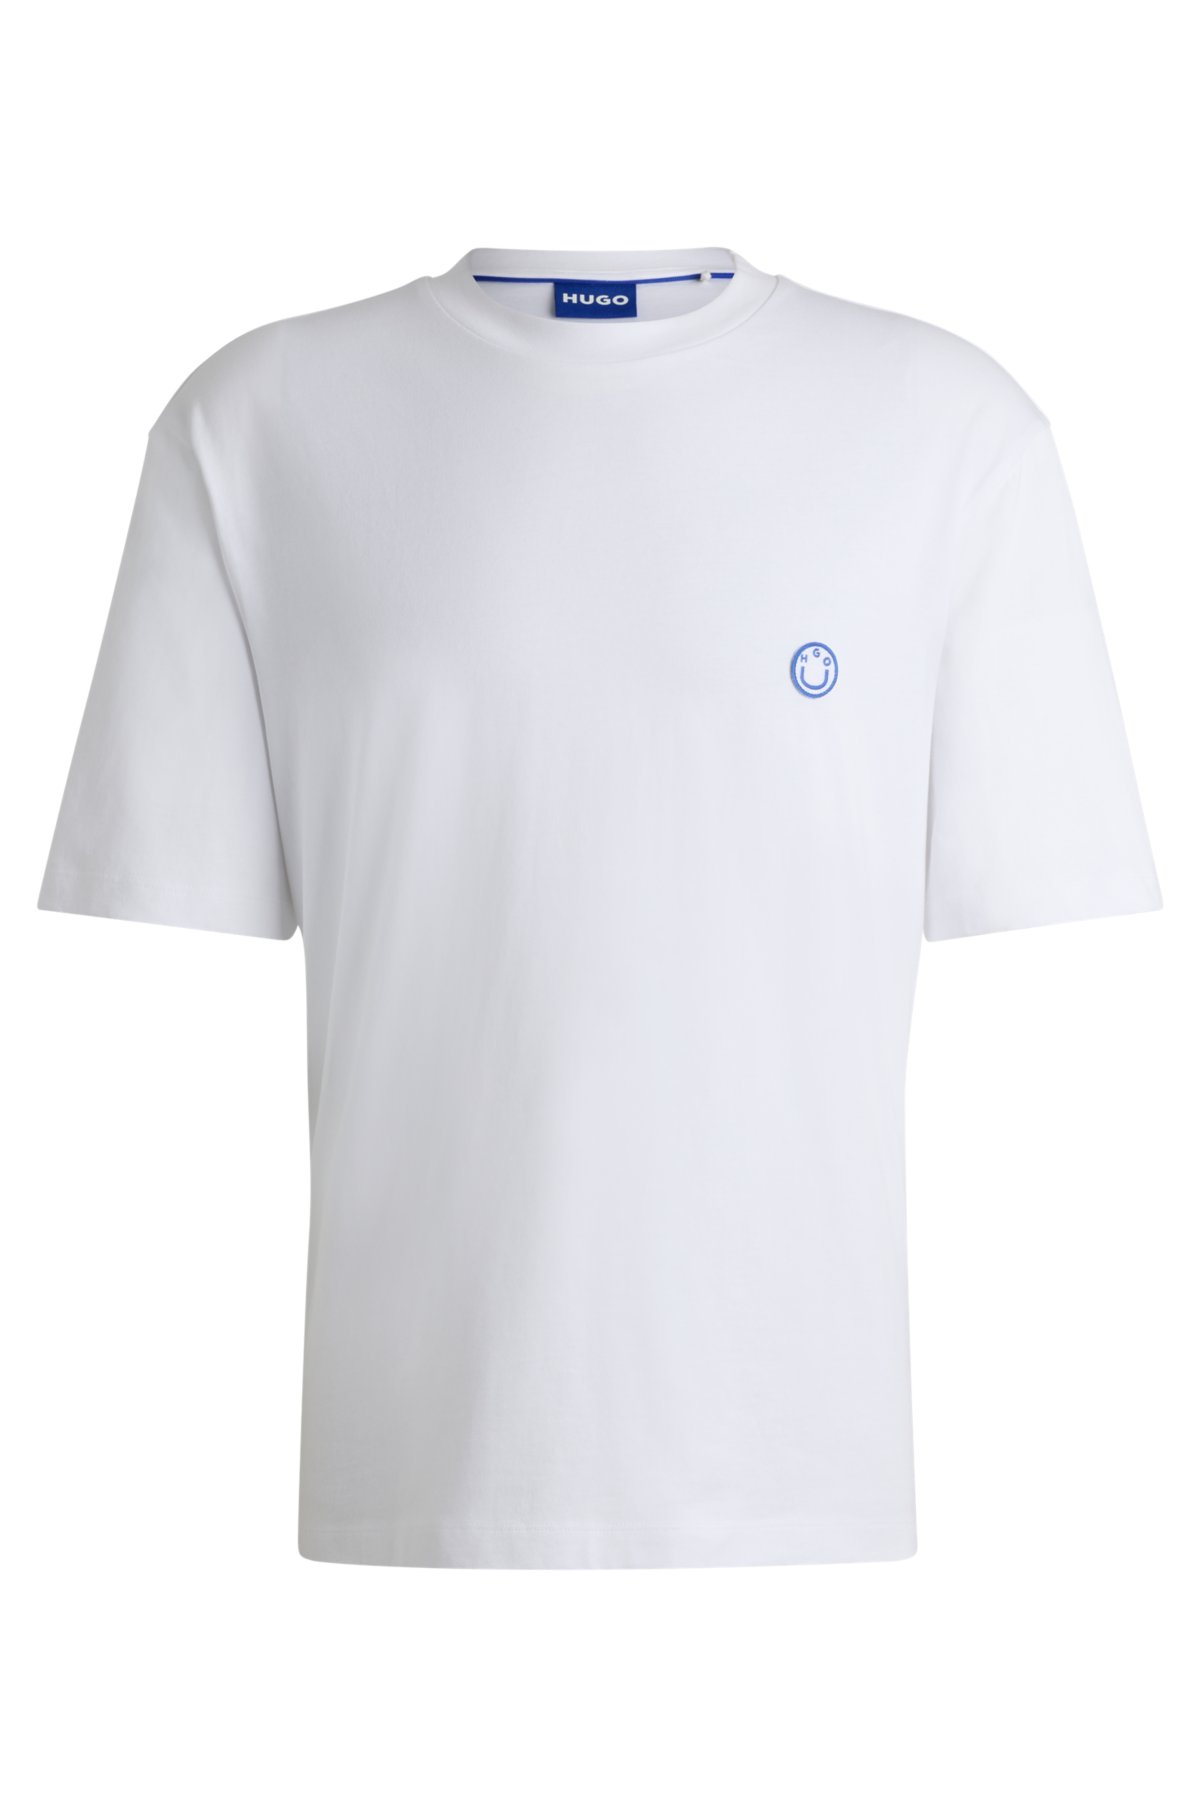 Cotton-jersey T-shirt with smiley-face logo, White